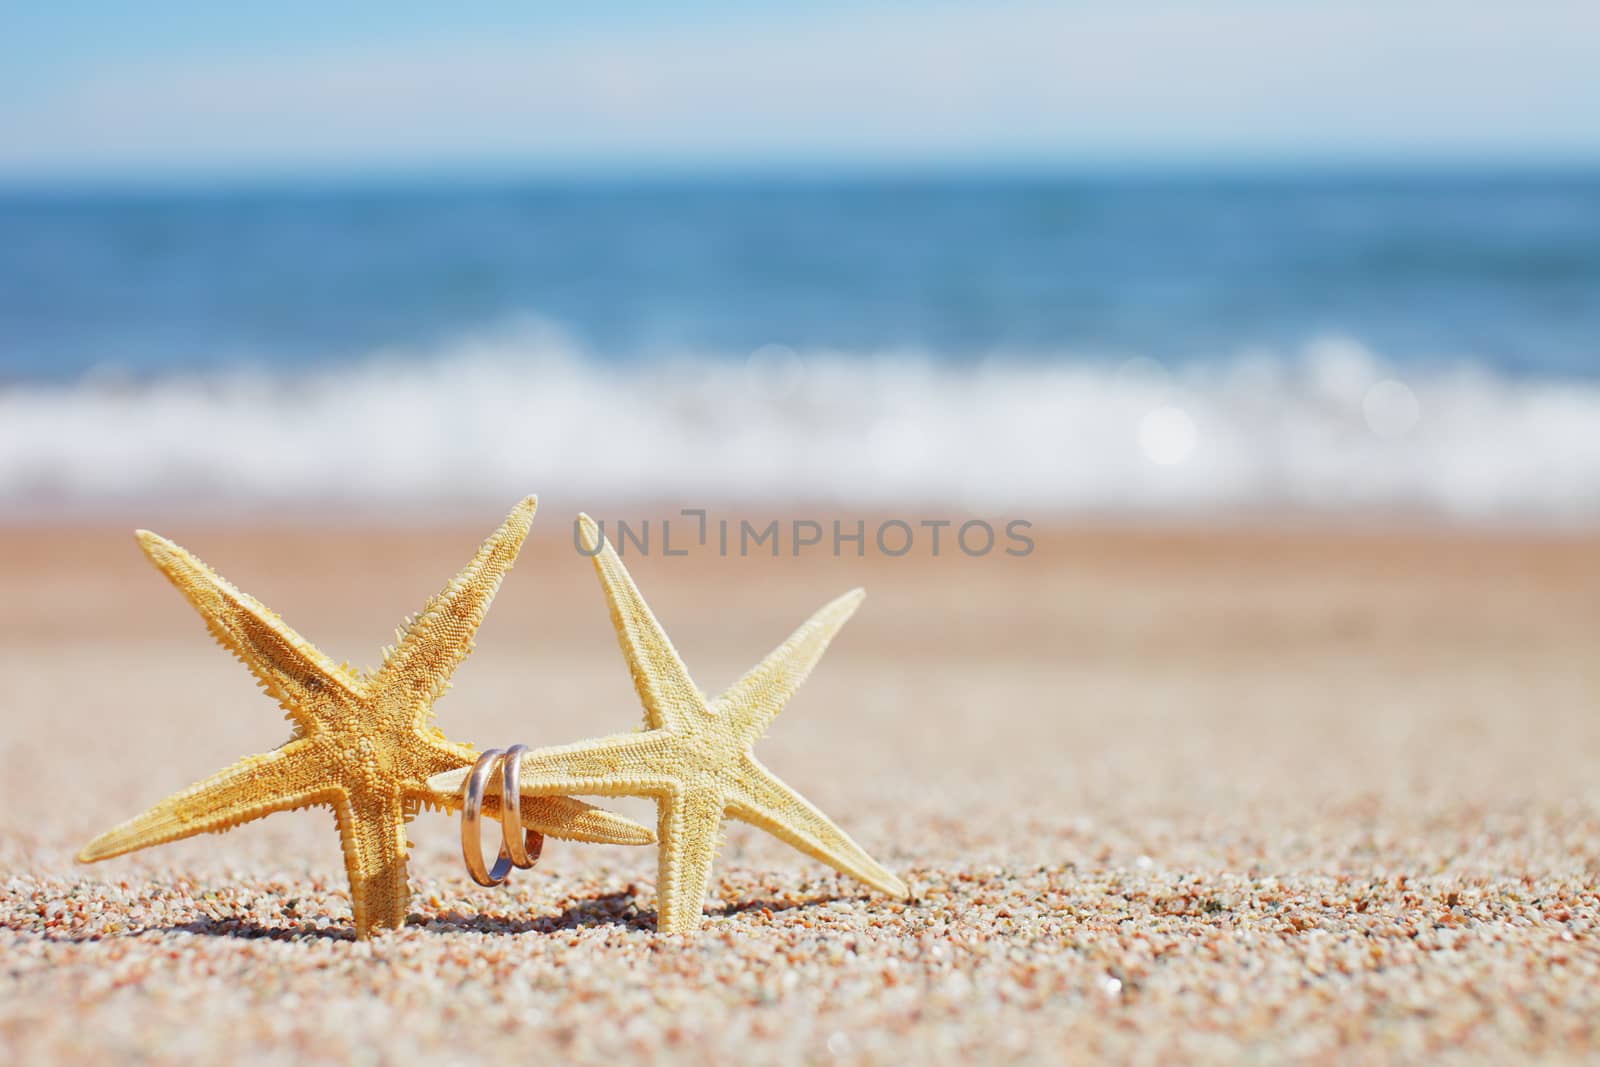 Starfish with wedding rings on the beach. Summer vacation concept. Family holidays by the sea by selinsmo